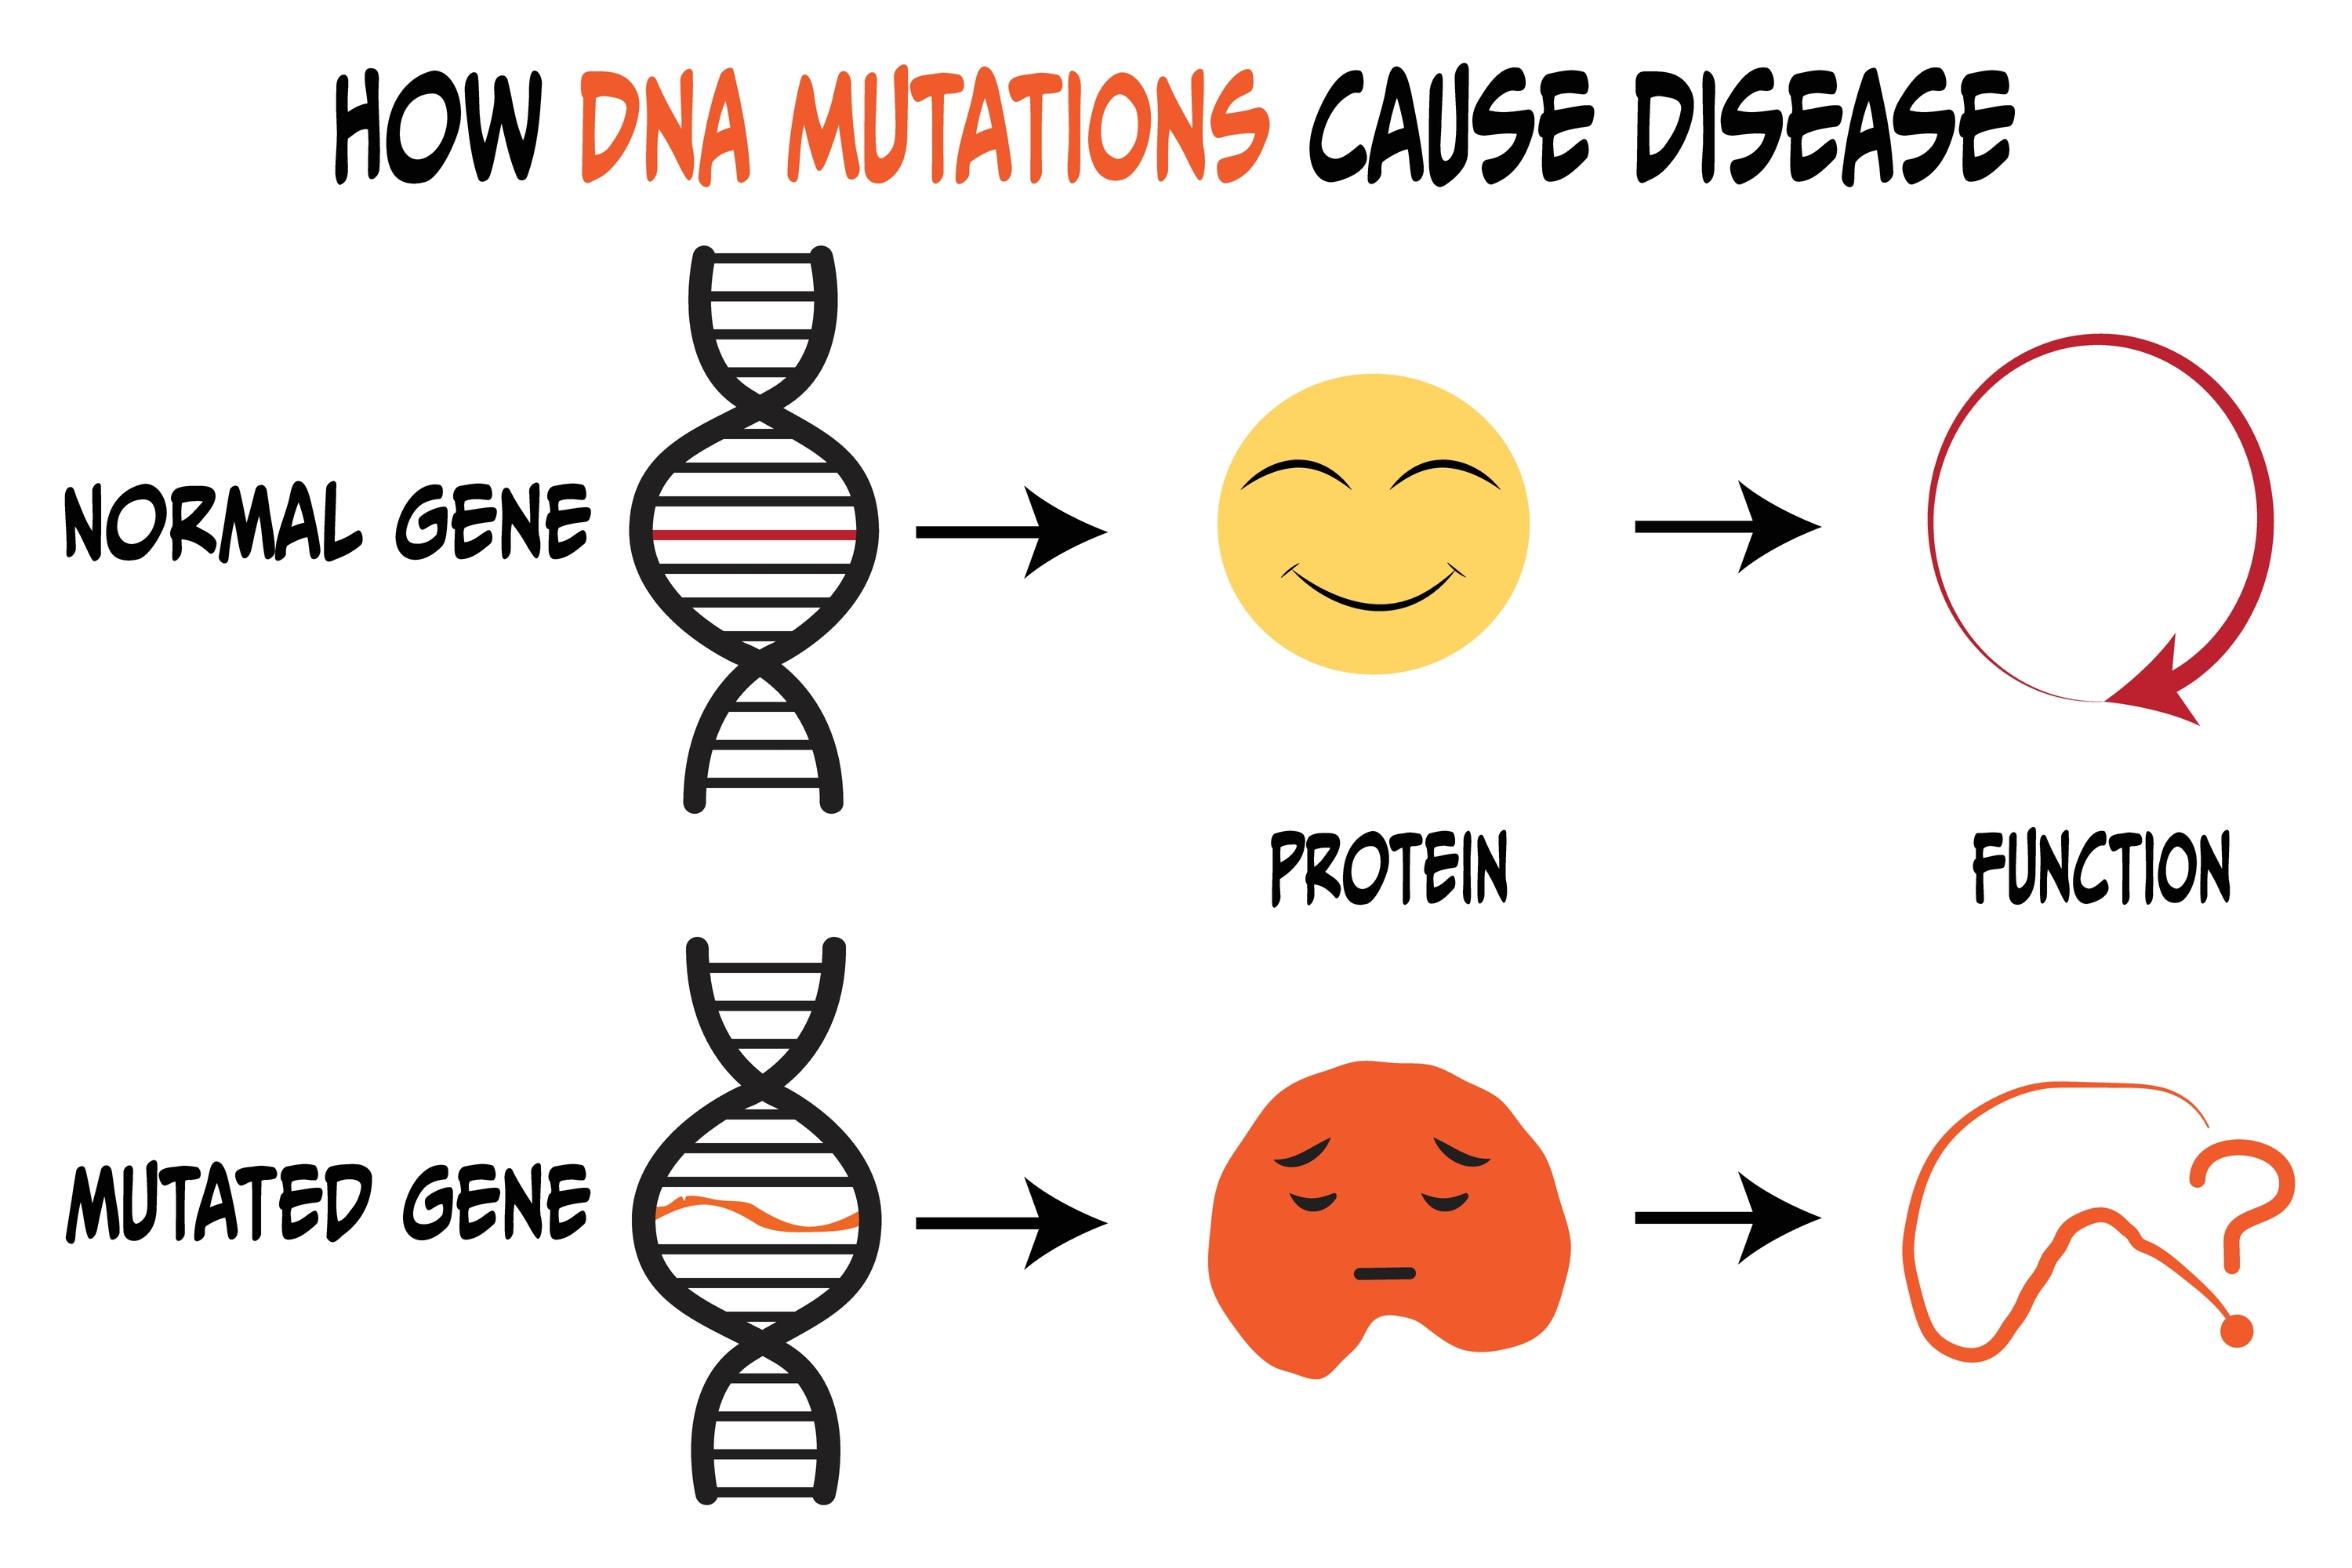 How DNA mutations cause disease illustration